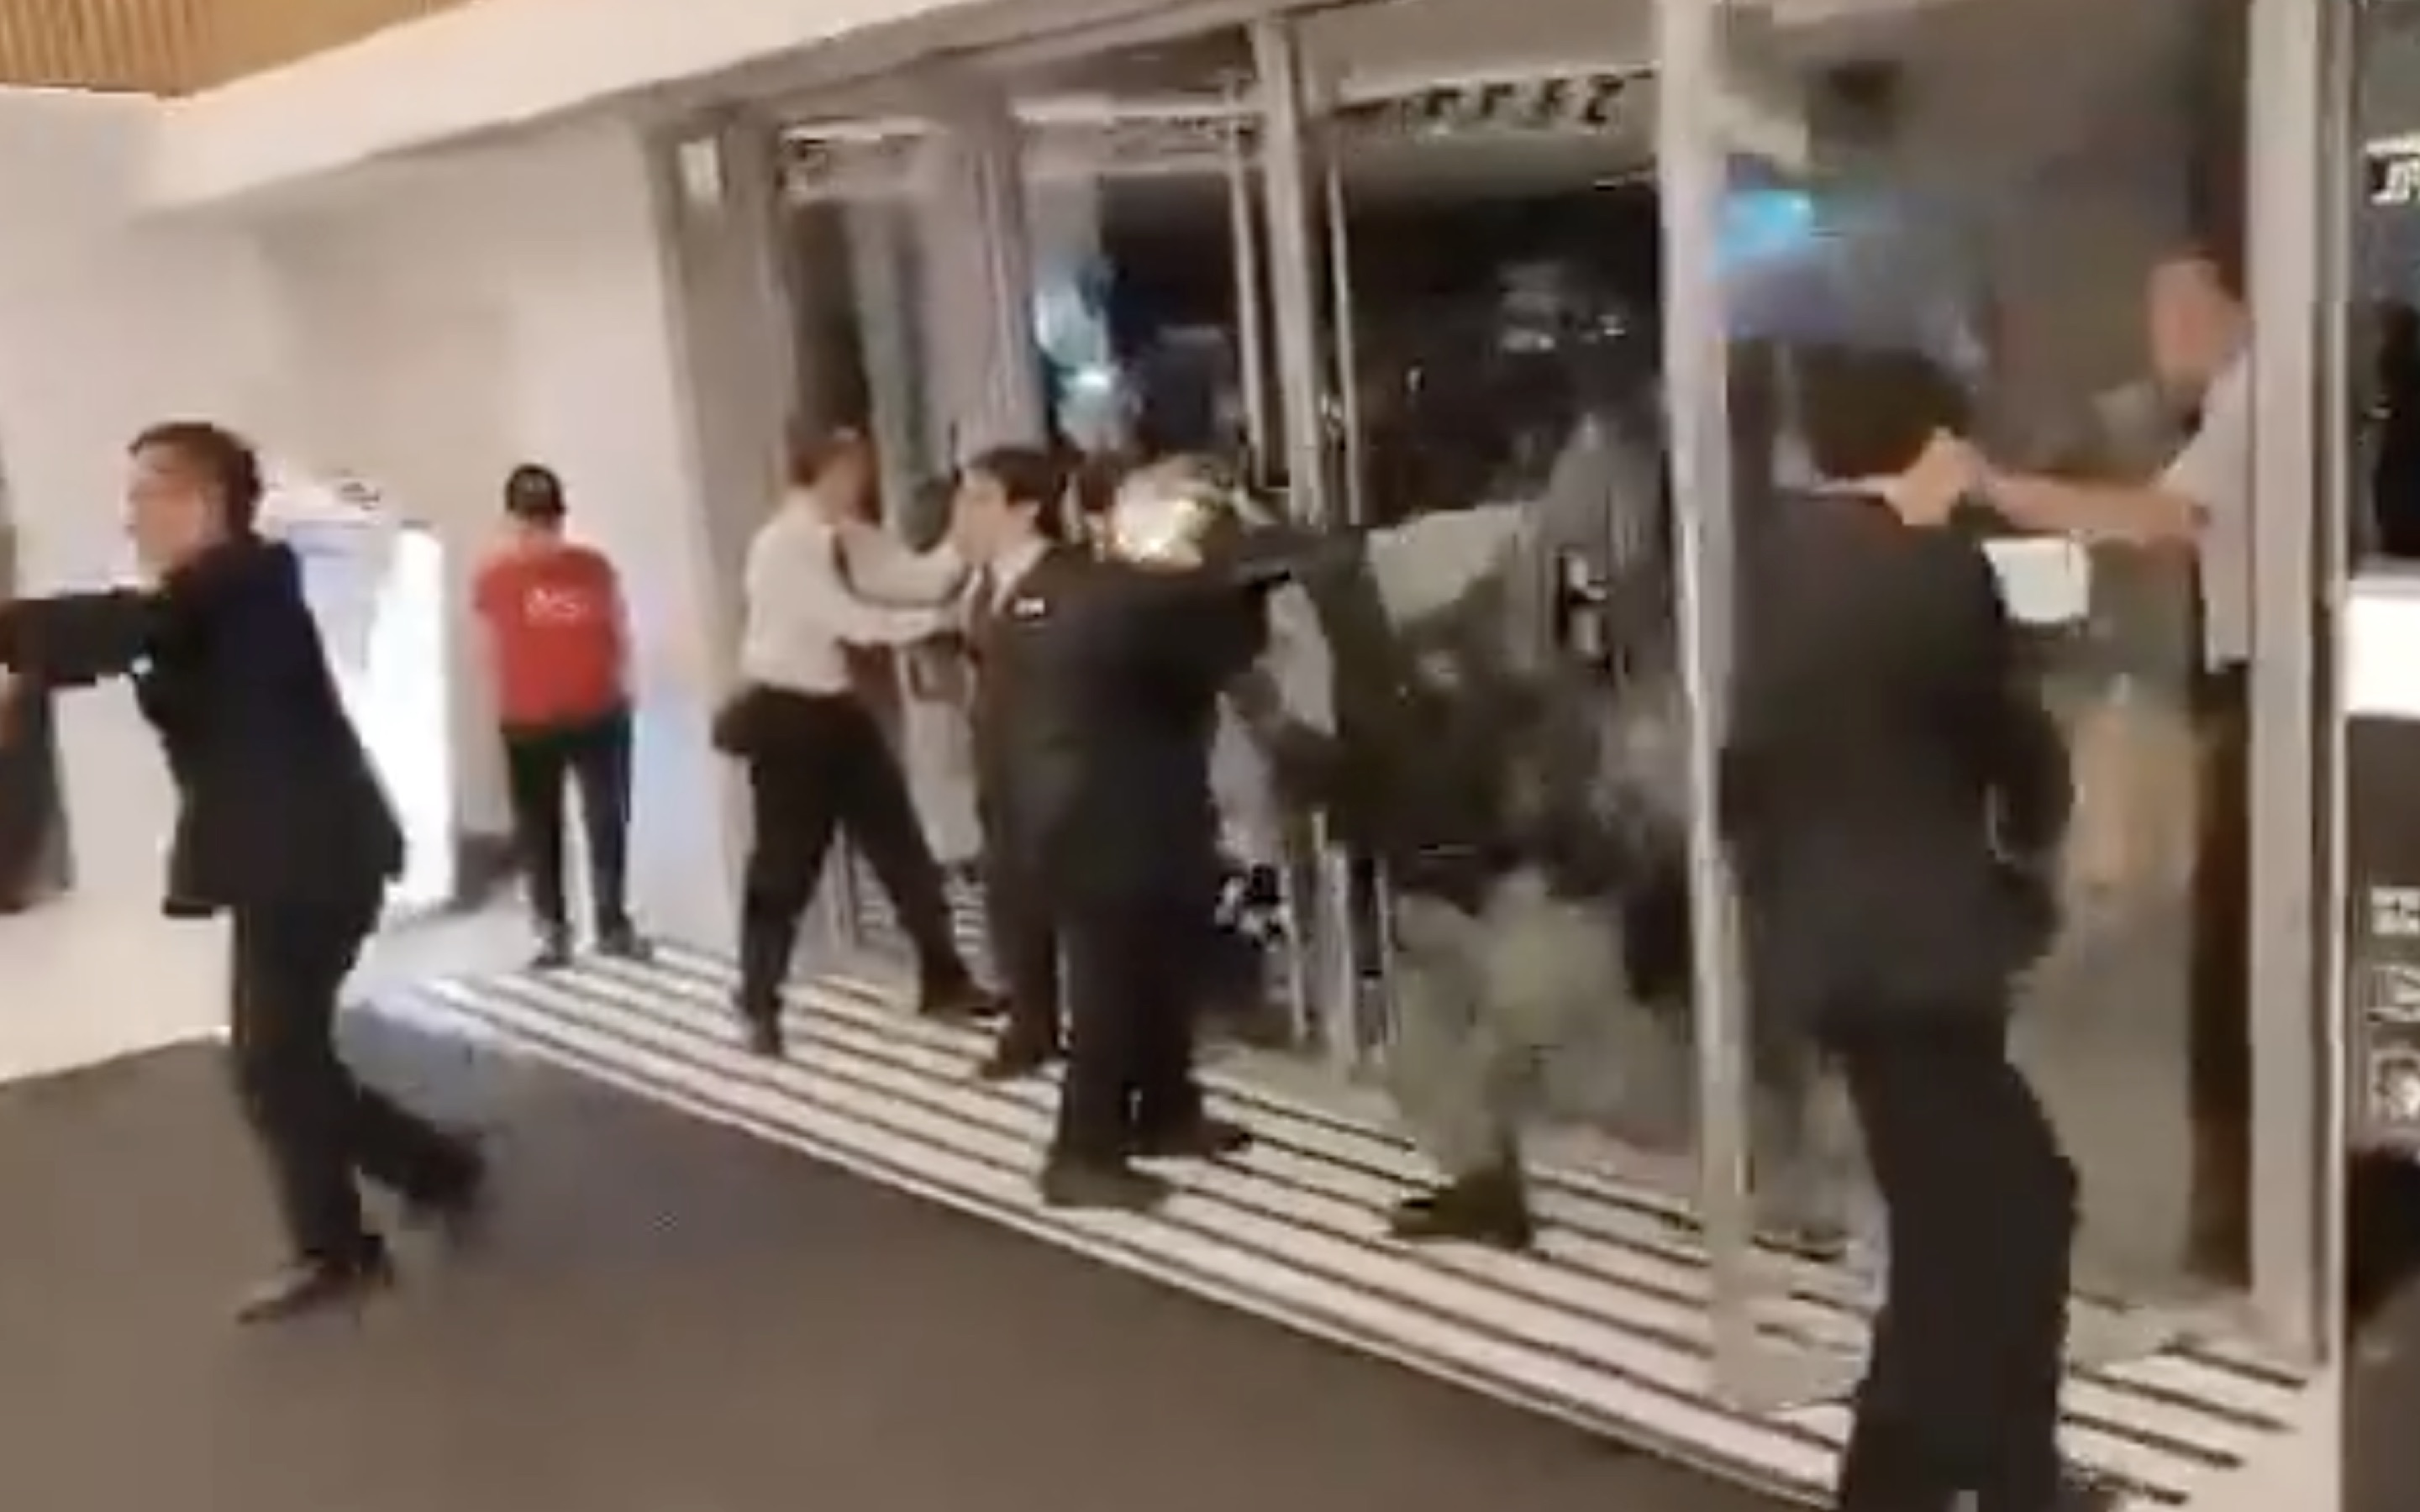 Viral video shows the moment riot police charge into a mall in Ma On Shan to arrest someone. Mall security guards can be seen trying to hold the doors closed to prevent them from entering. Screengrab via Facebook video.